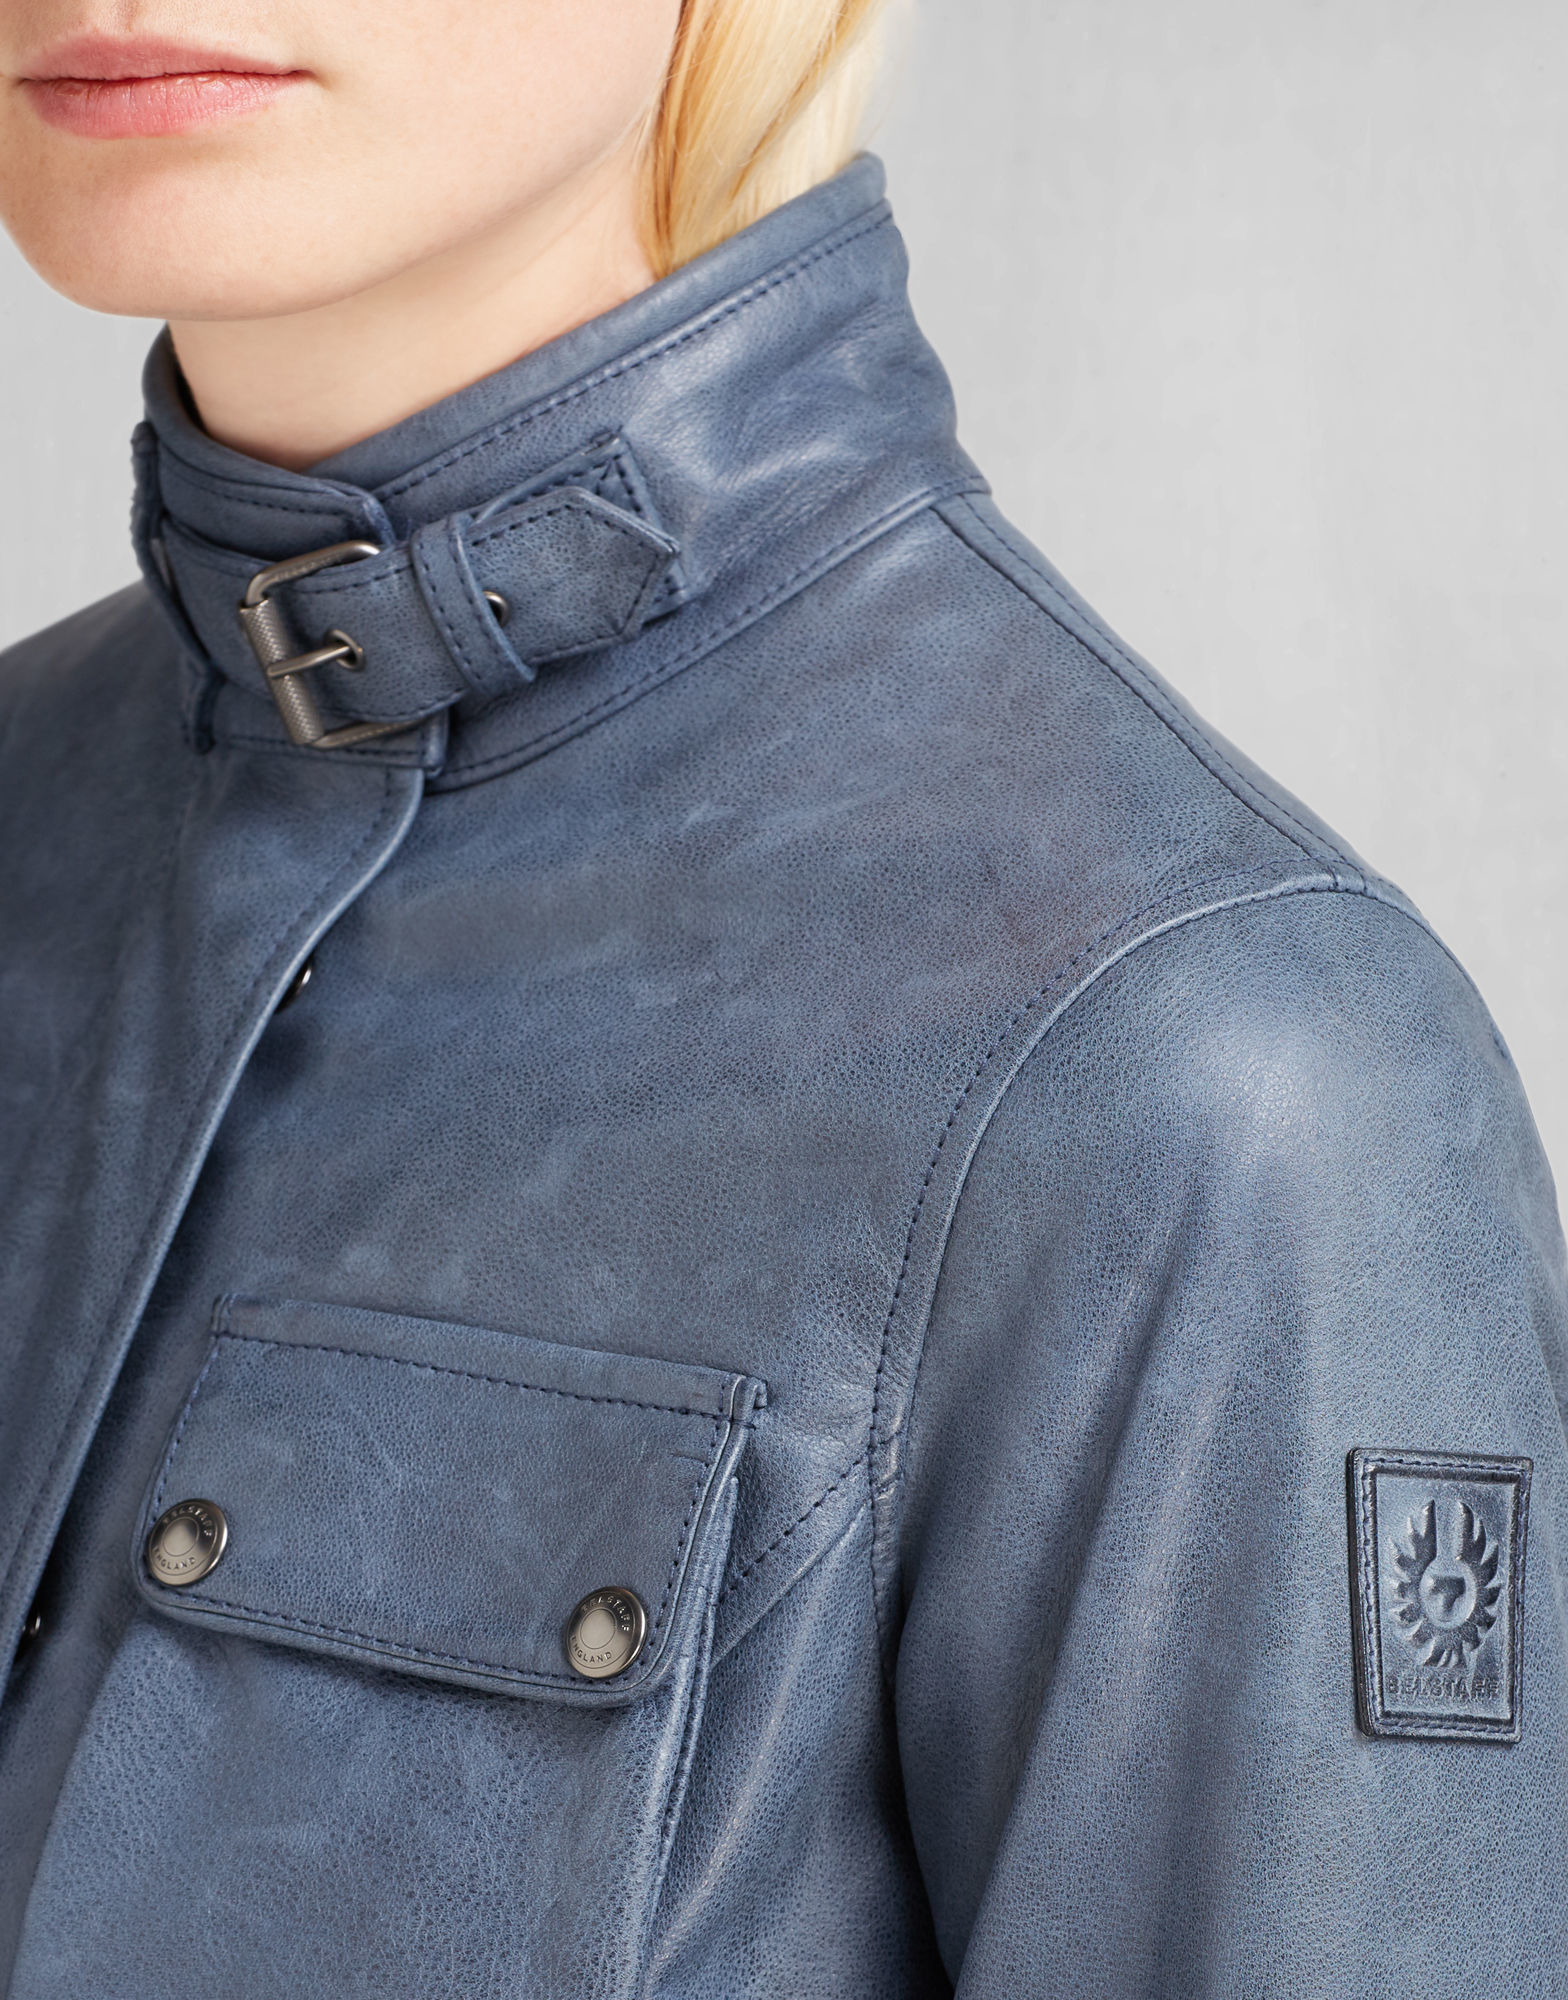 Belstaff The Triumph Waxed-Leather Jacket in Navy (Blue) - Lyst